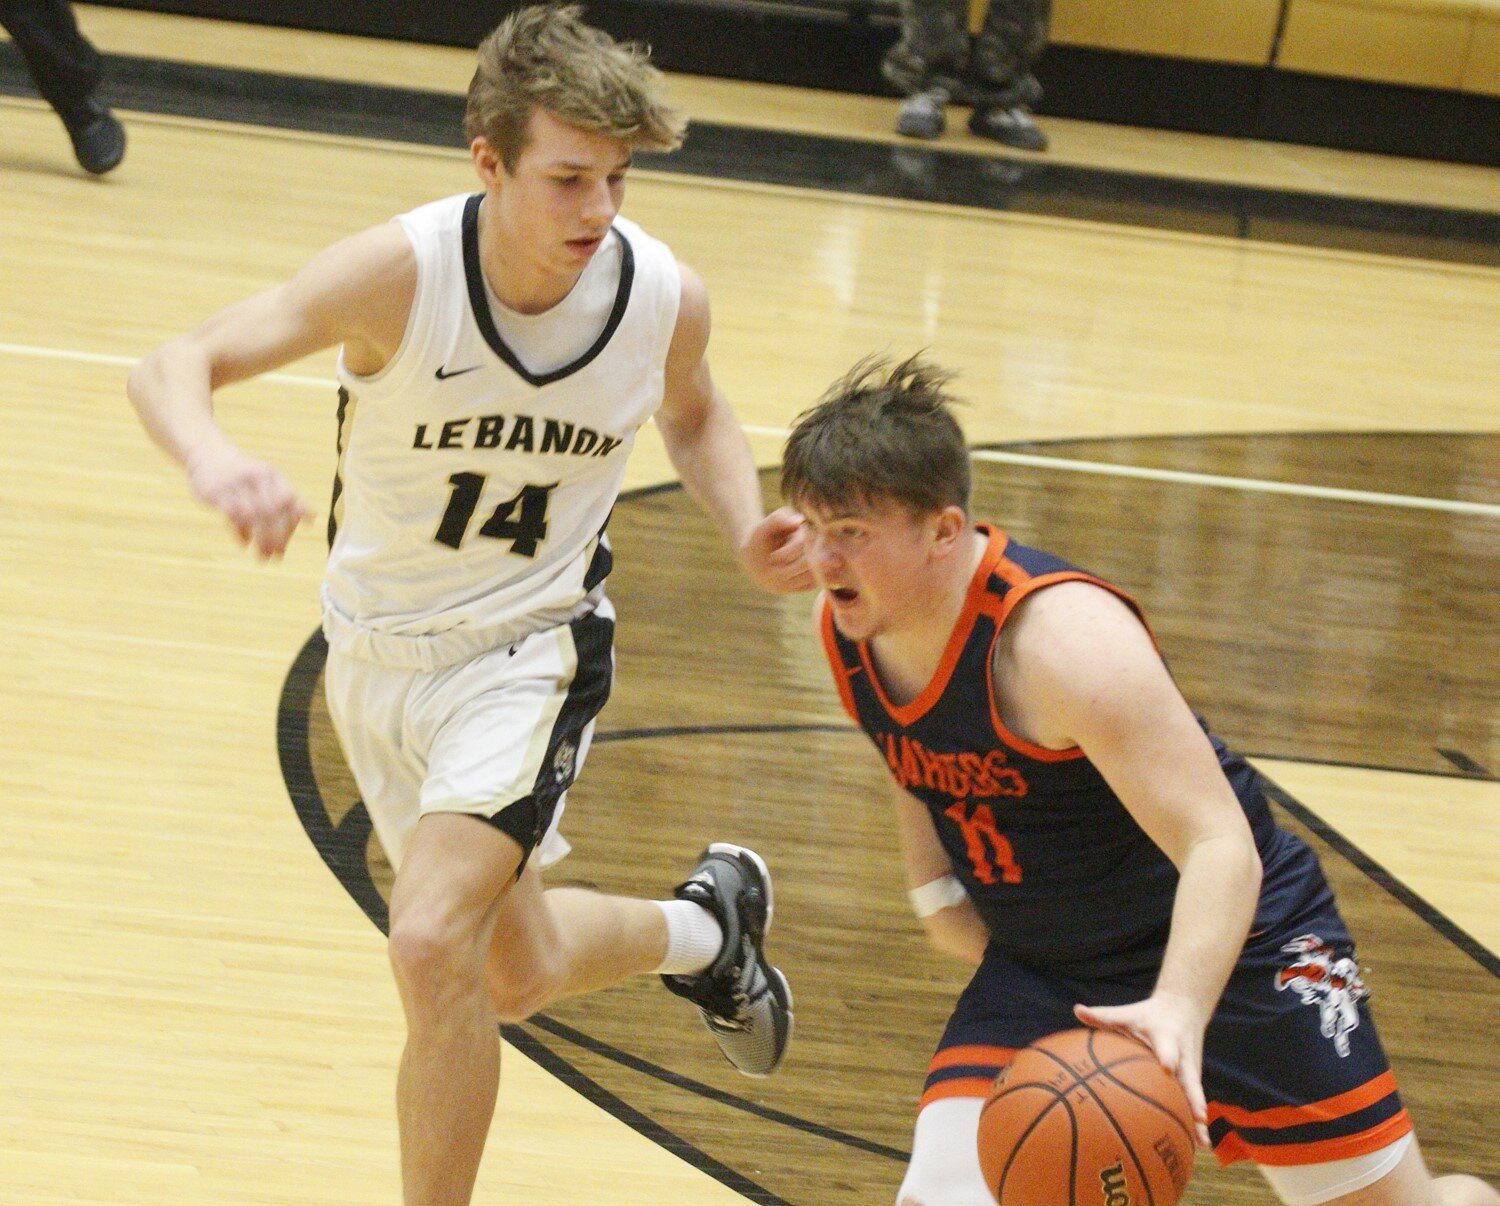 North's Ross Dyson drives the ball across mid-court during the Chargers 5-29 loss to Lebanon.